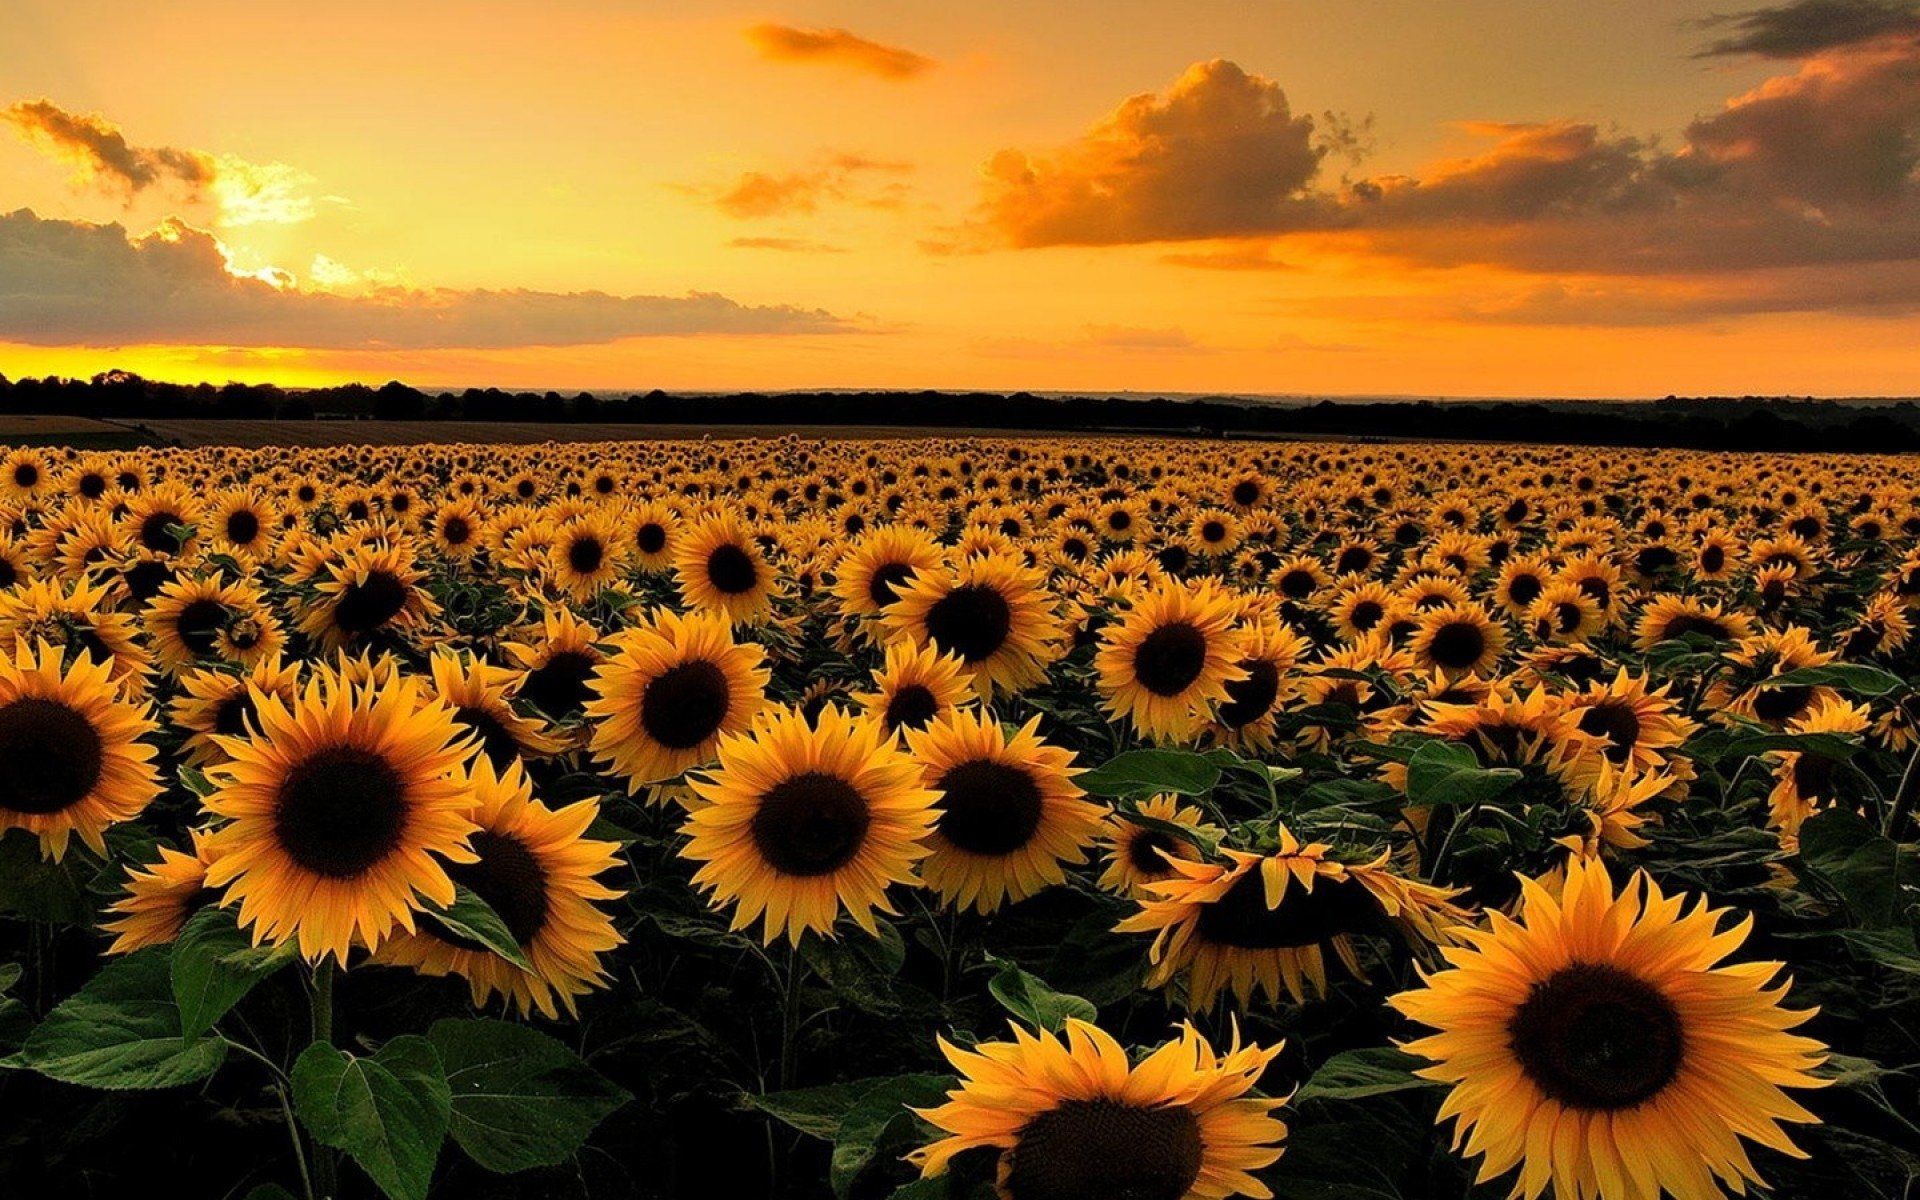 A field of sunflowers with the sun setting in the background - Sunflower